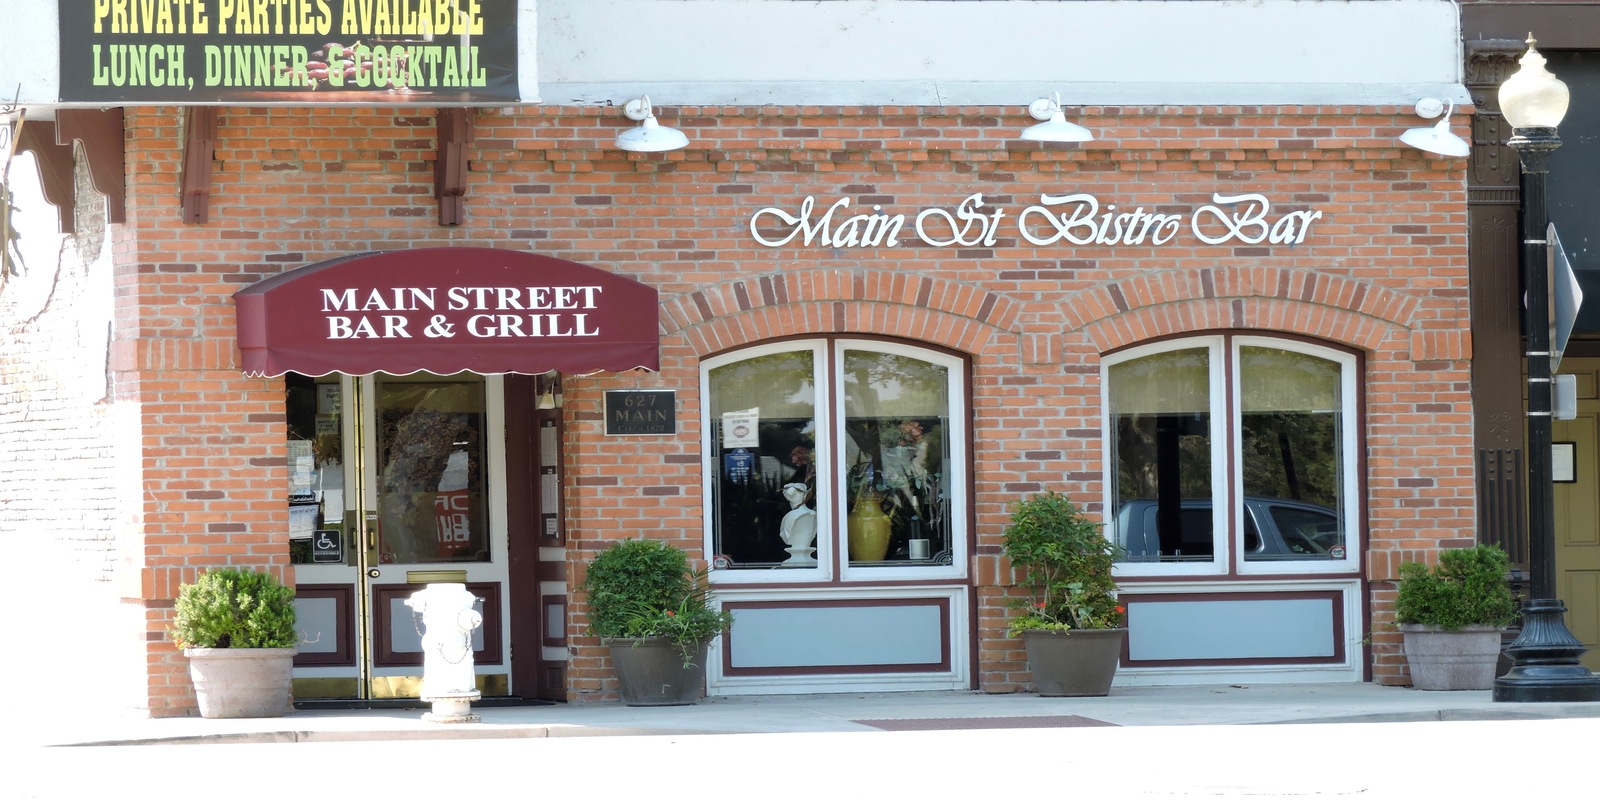 Image of Main Street Bar and Grill